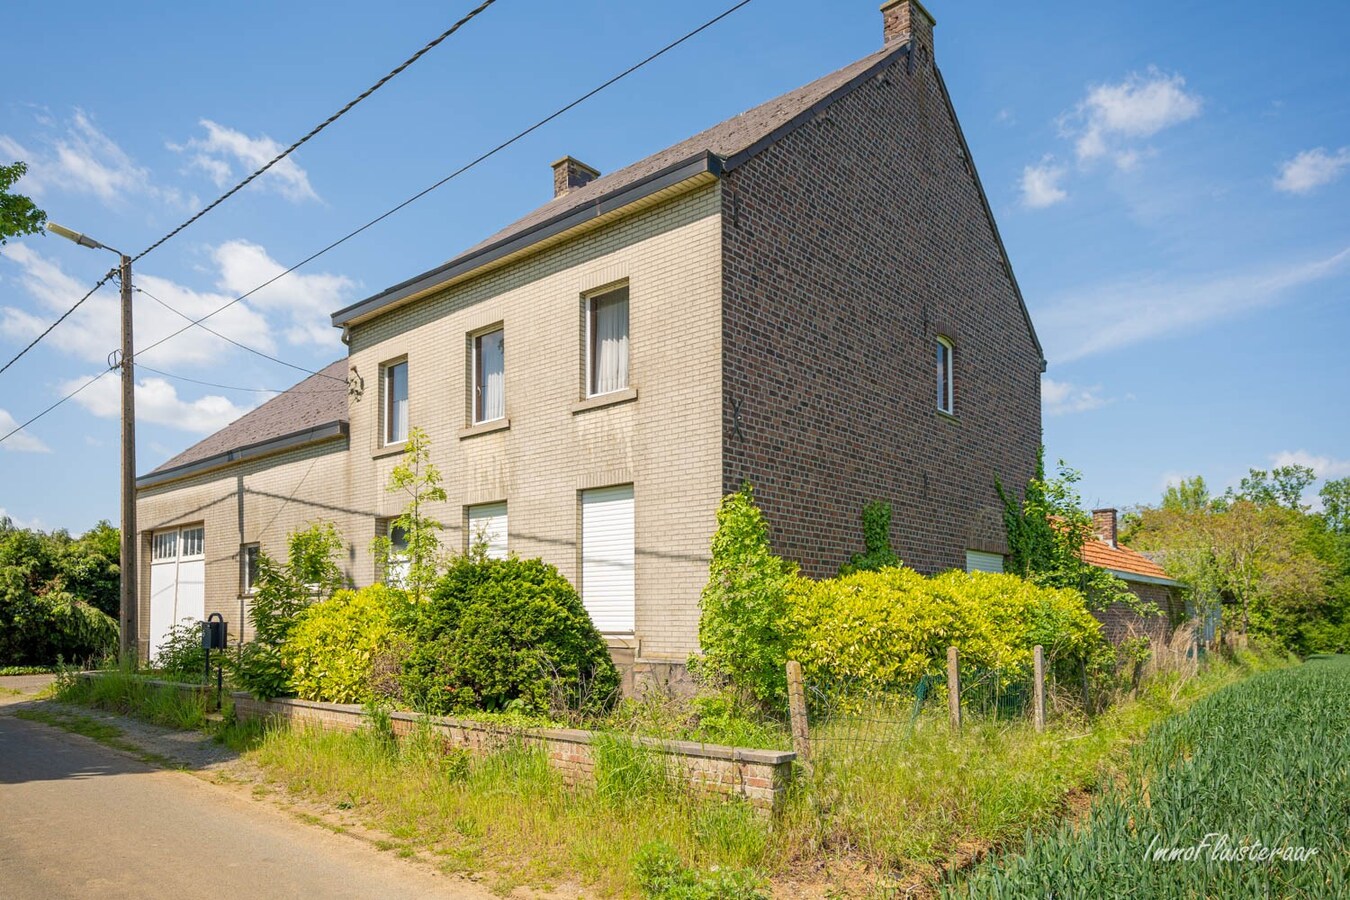 Property for sale |  with option - with restrictions in Bekkevoort